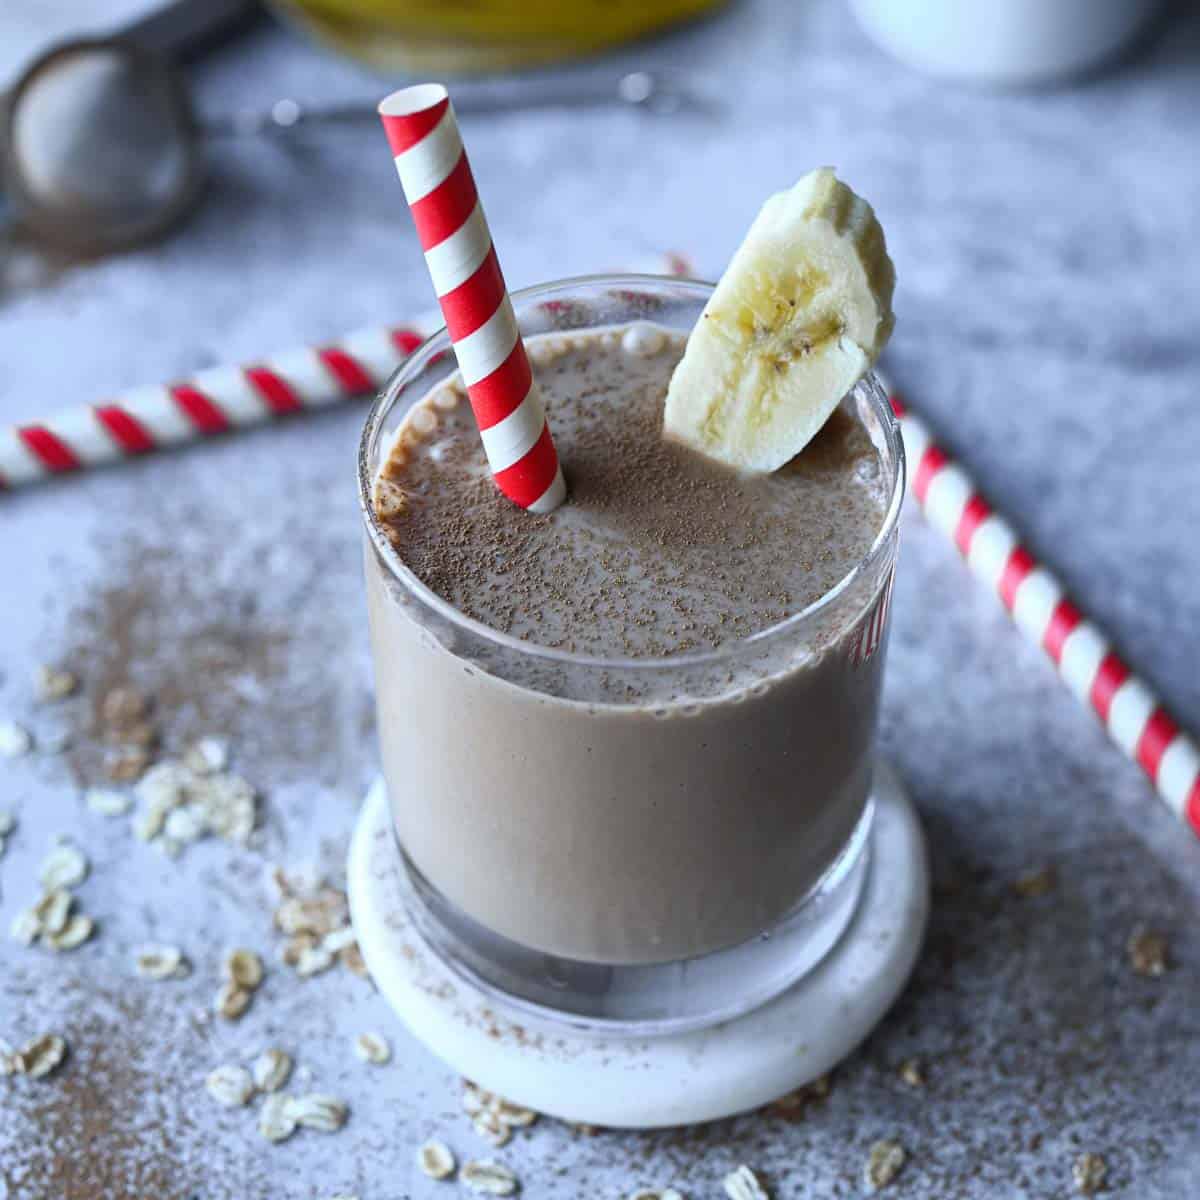 Chocolate tahini smoothie in a clear glass with a red and white straw on a grey surface.